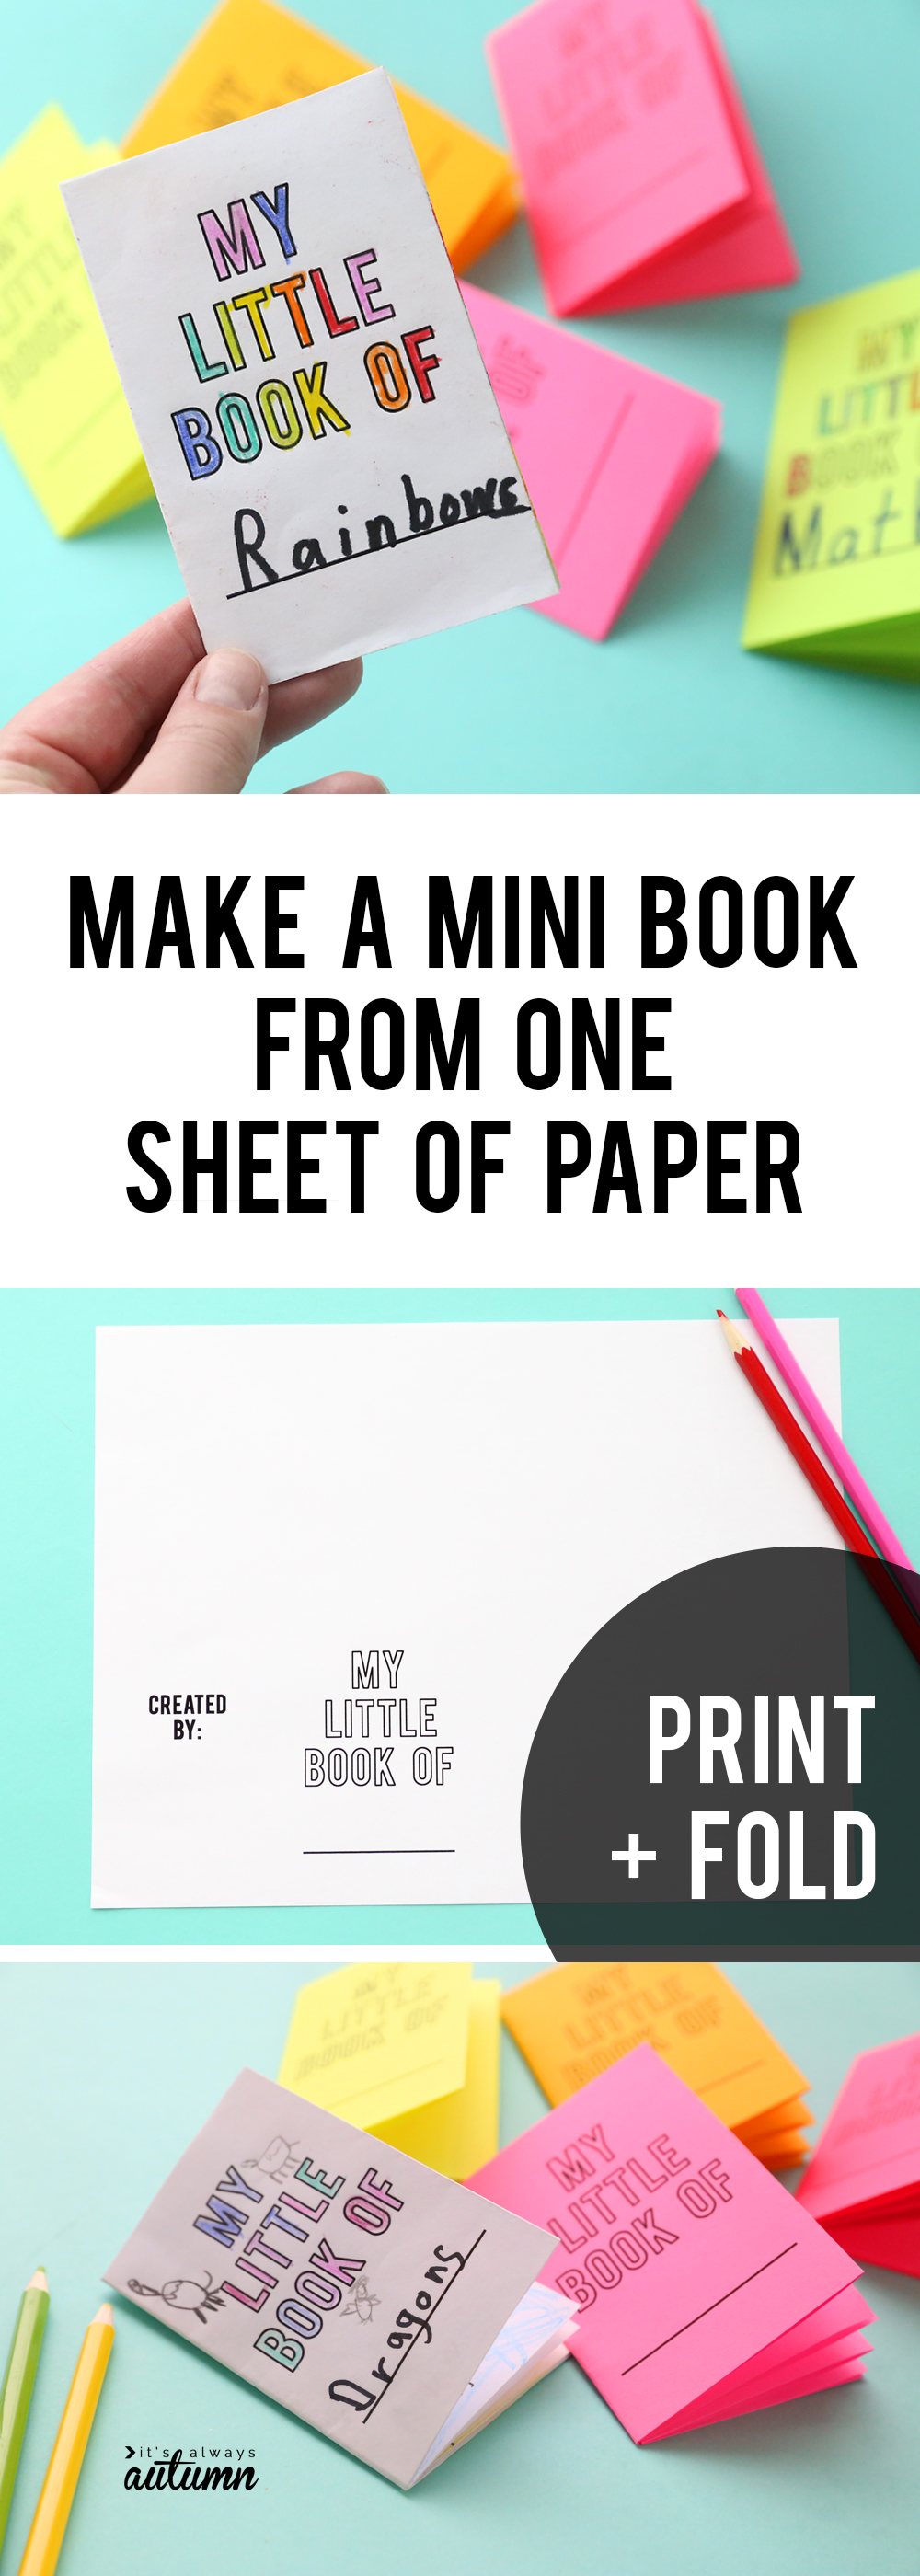 Printable template for making a mini book from one sheet of paper